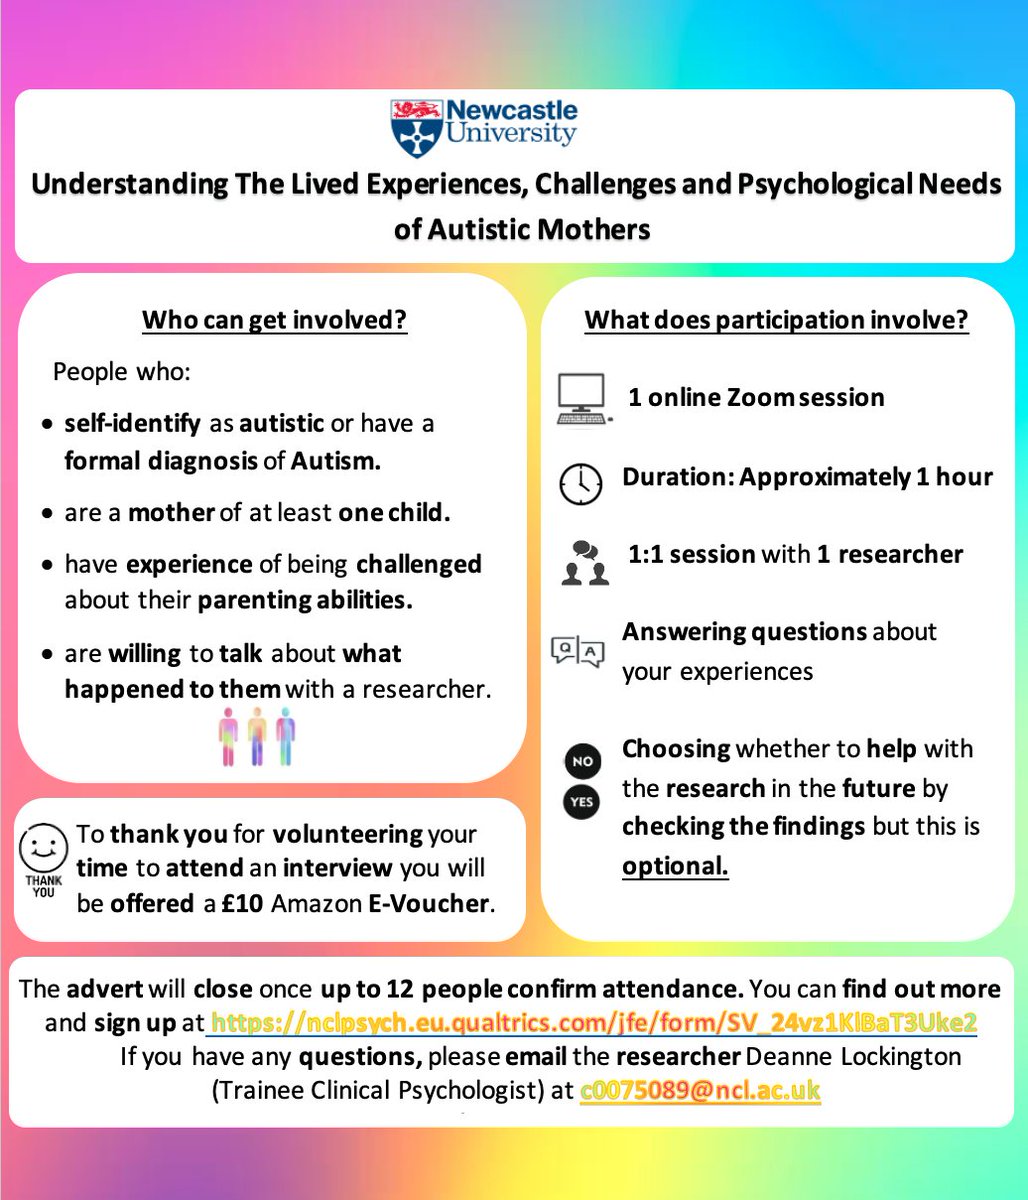 Are you an autistic mother who has experience of their parenting being questioned/challenged? Please consider taking part in this important project. Link to find out more: nclpsych.eu.qualtrics.com/jfe/form/SV_24… @MissRub46071882 @FiiResearch @SpcialNdsJungle @PFAN_UK @Andy_Bilson @DrJudes03